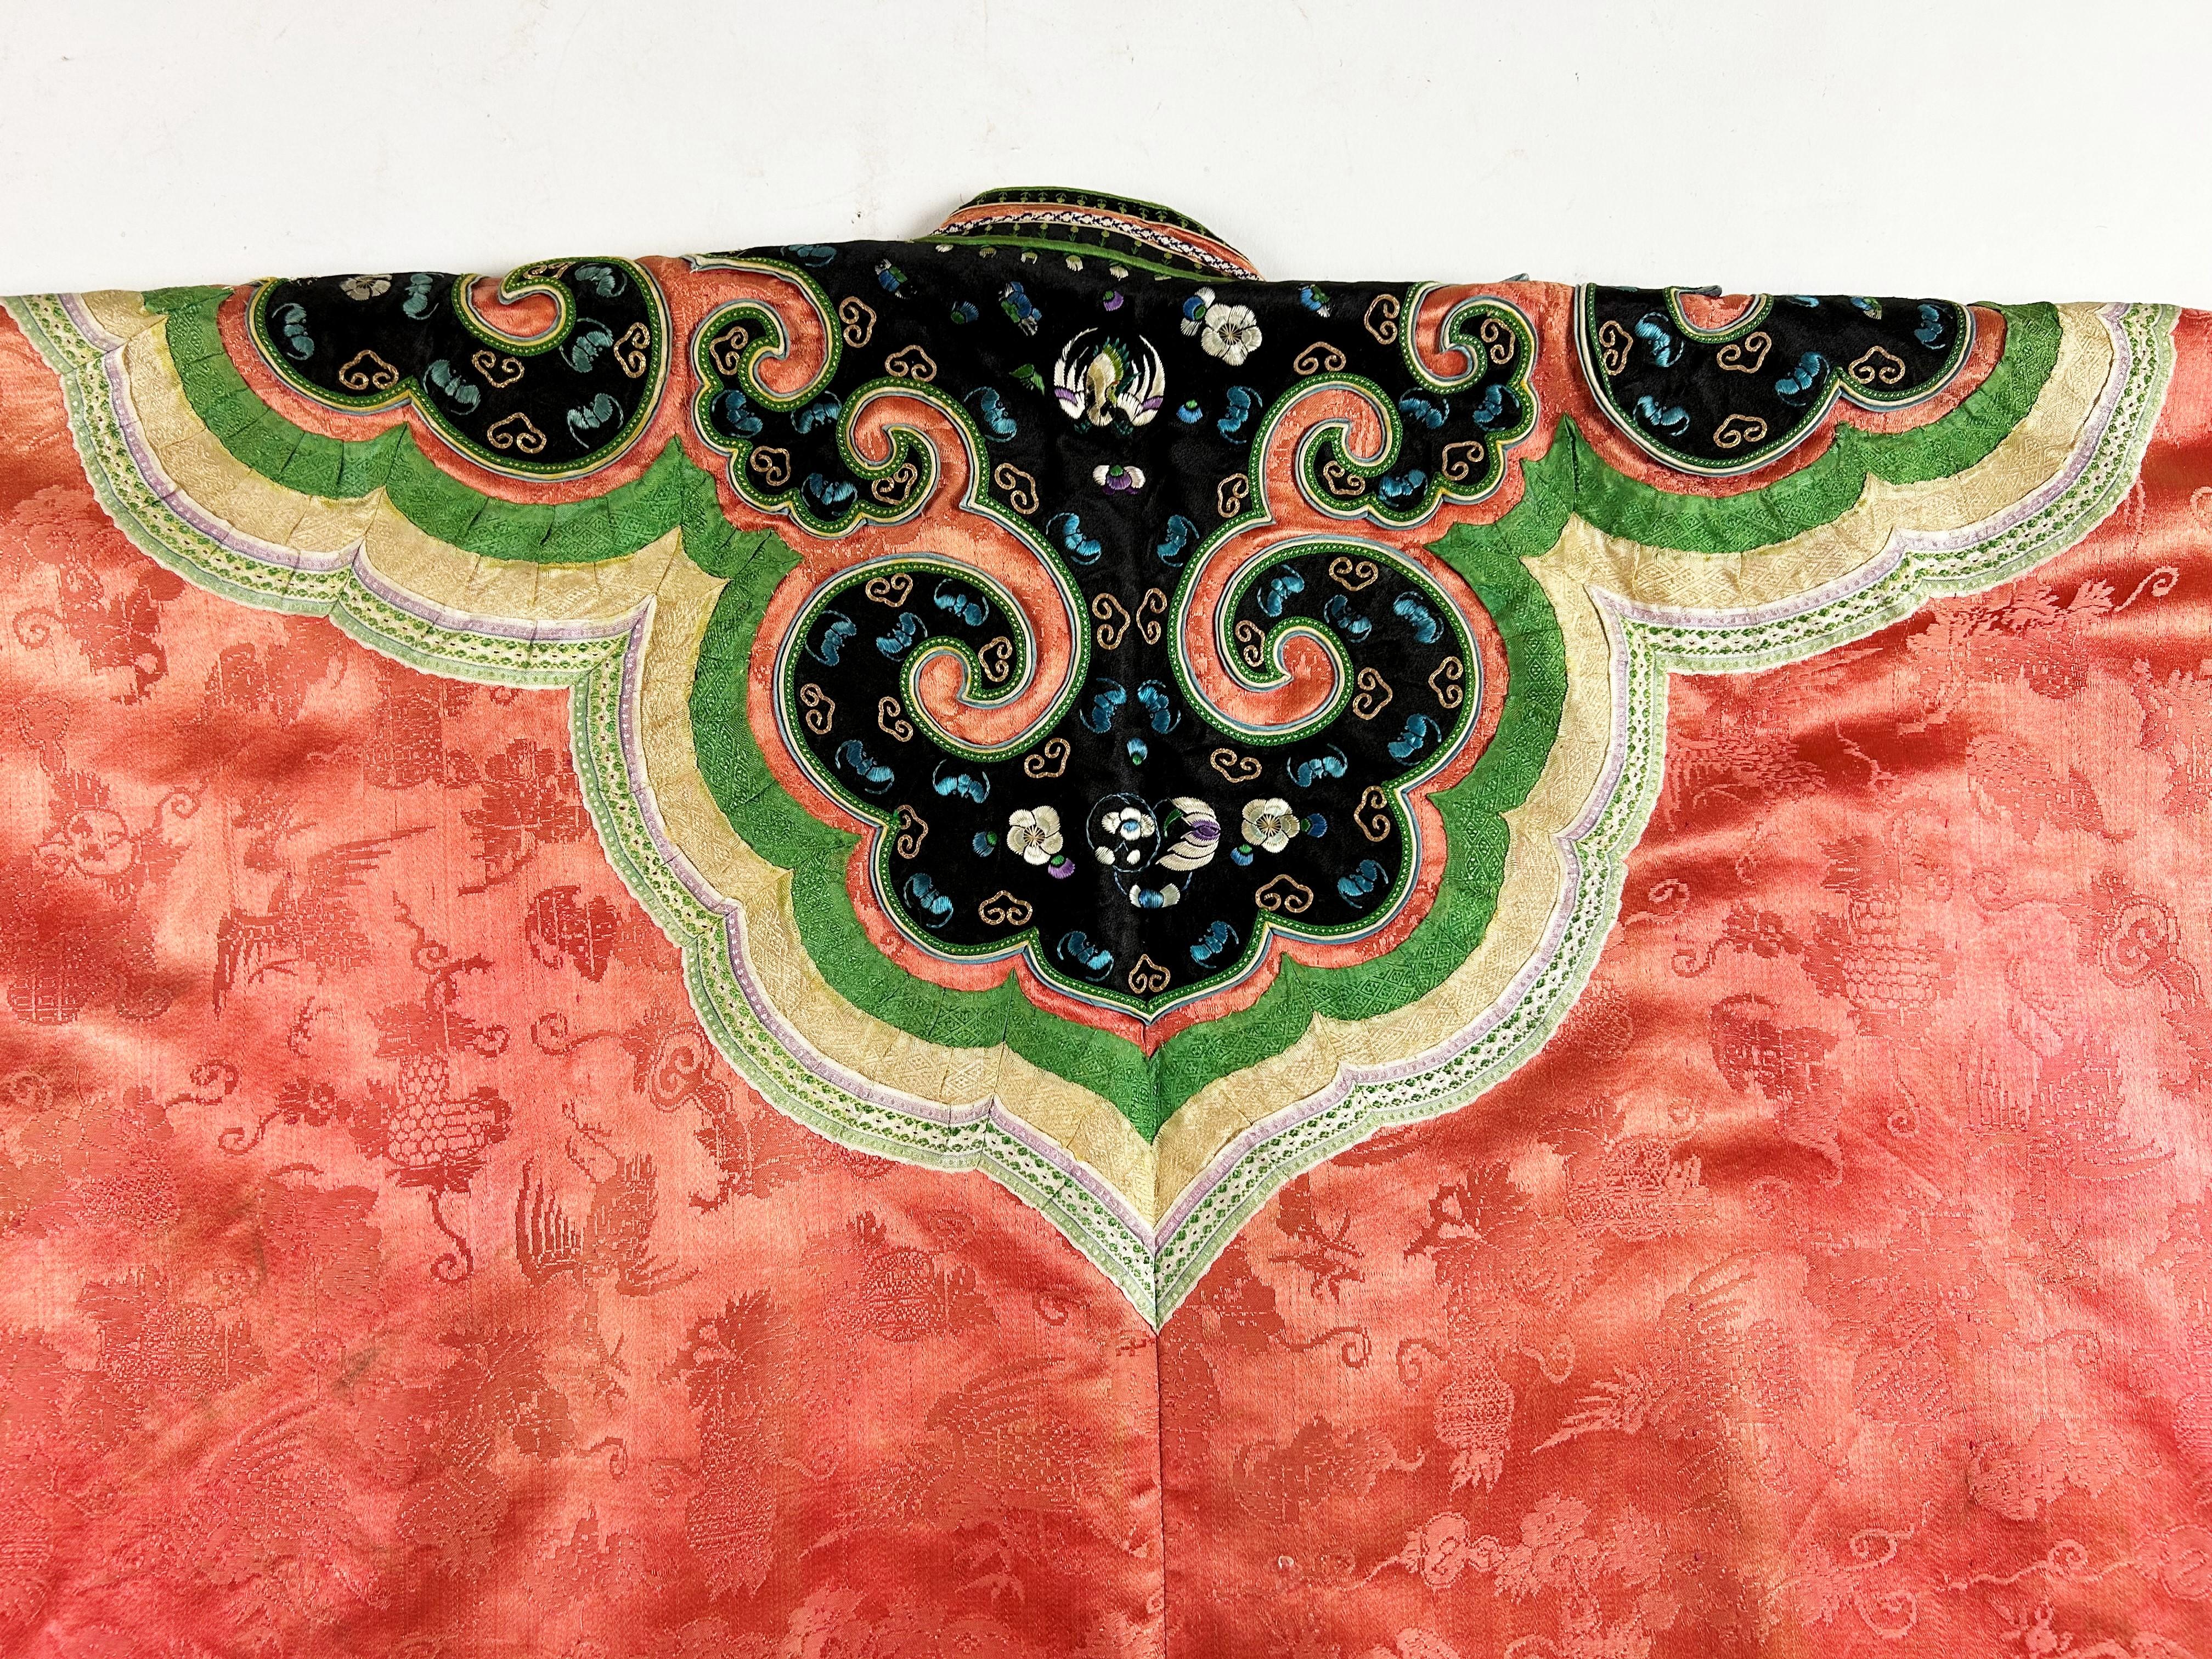 Pink Han woman's ceremonial tunic in Orange Damask - Qing China late 19th century